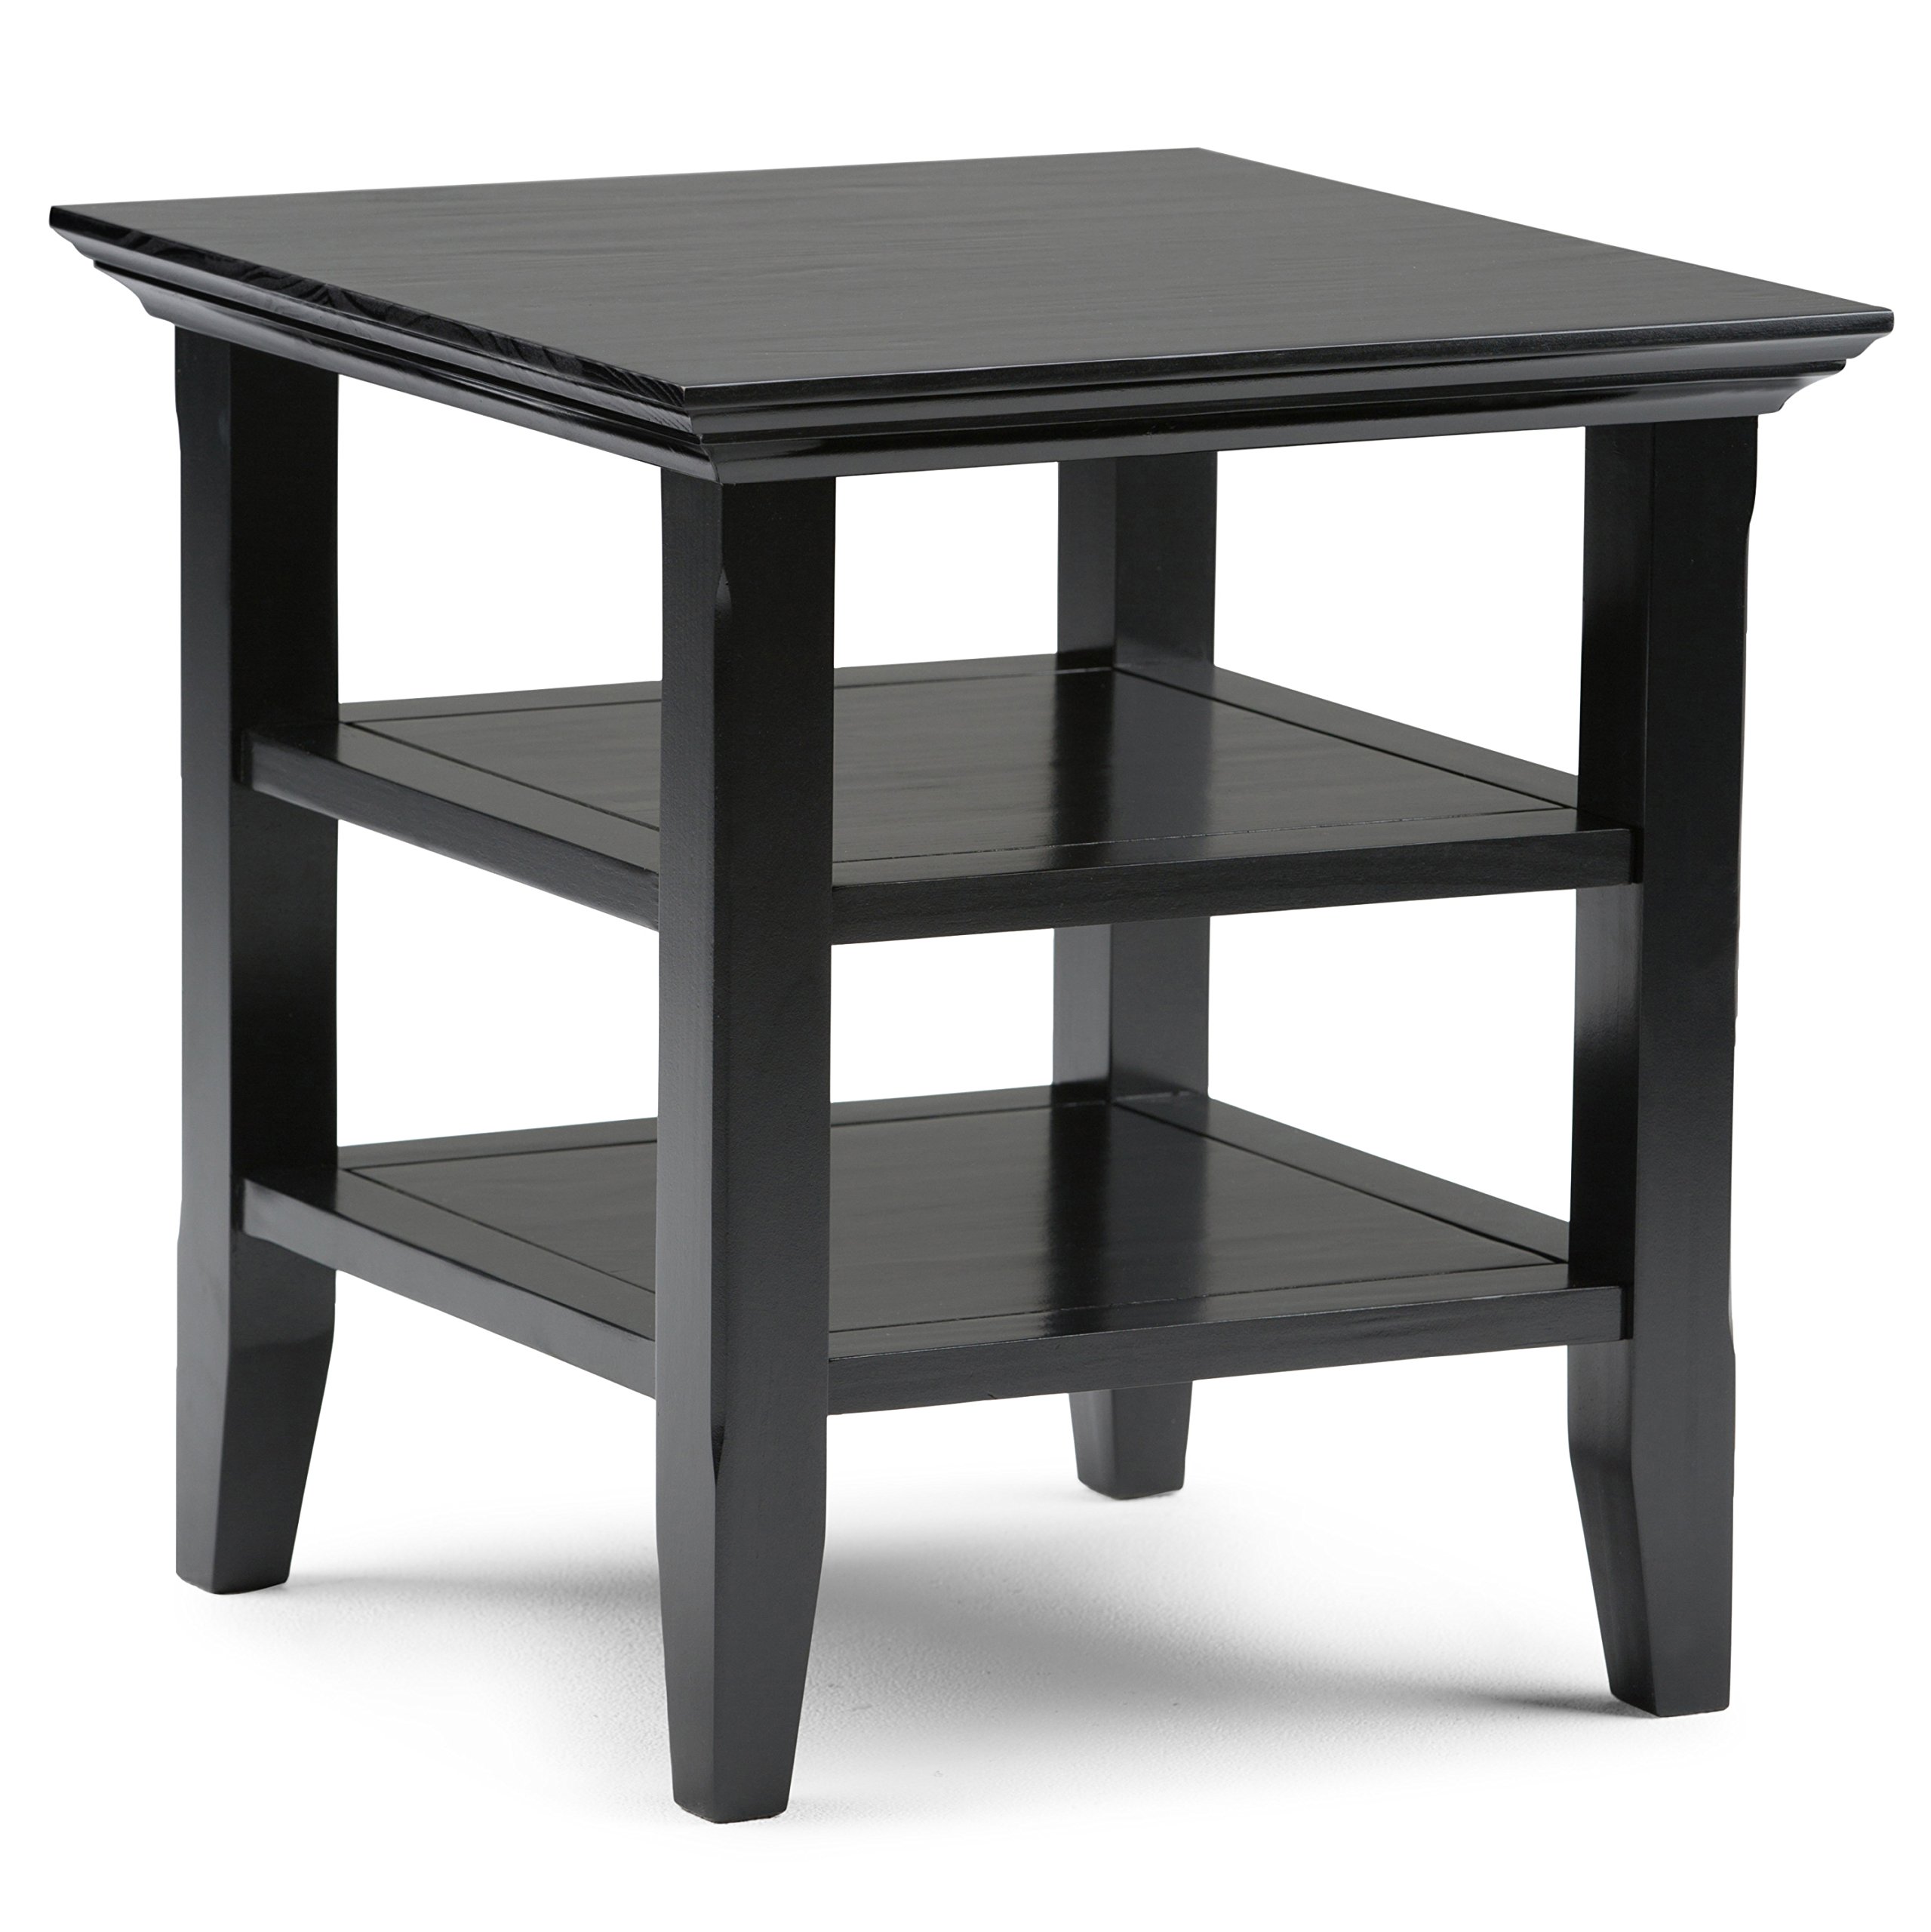 hospital table the fantastic best black end solid wood desk accent with lower shelf storage tables unit display cool trunks ethan and allen furniture jcpenney mens jeans filing